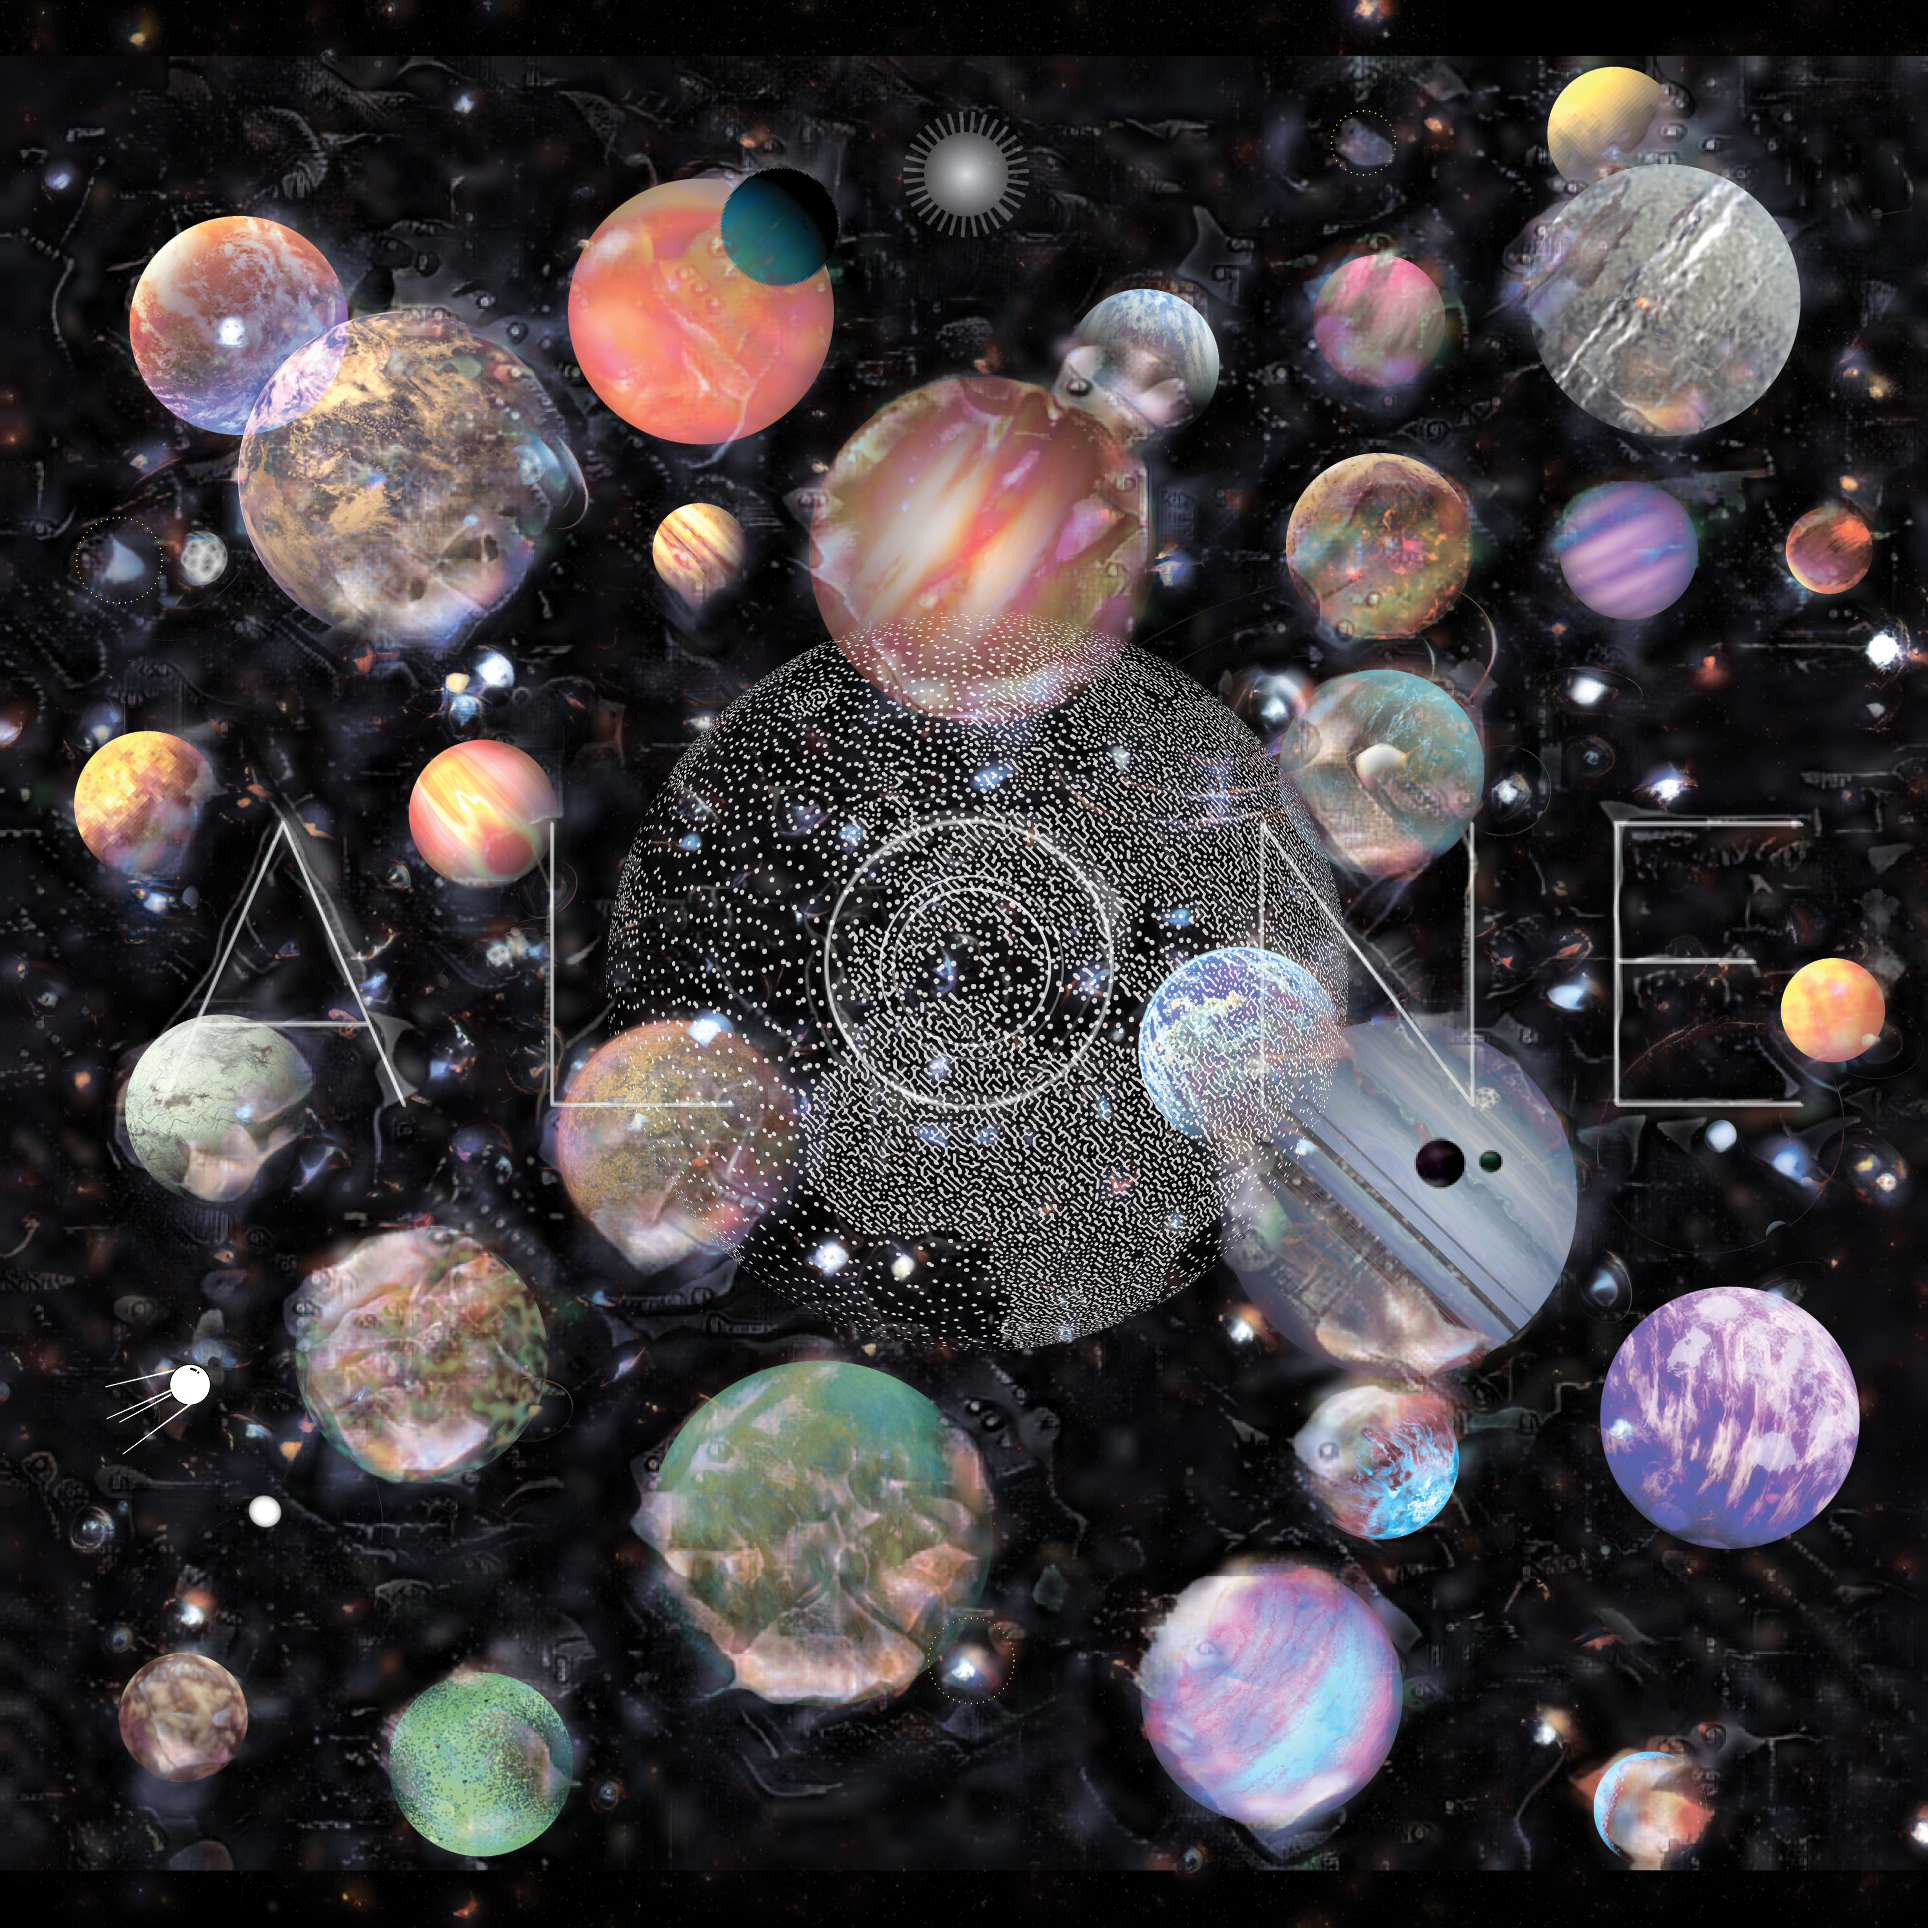 A simage of exoplanets by Erik Adigard, M-A-D